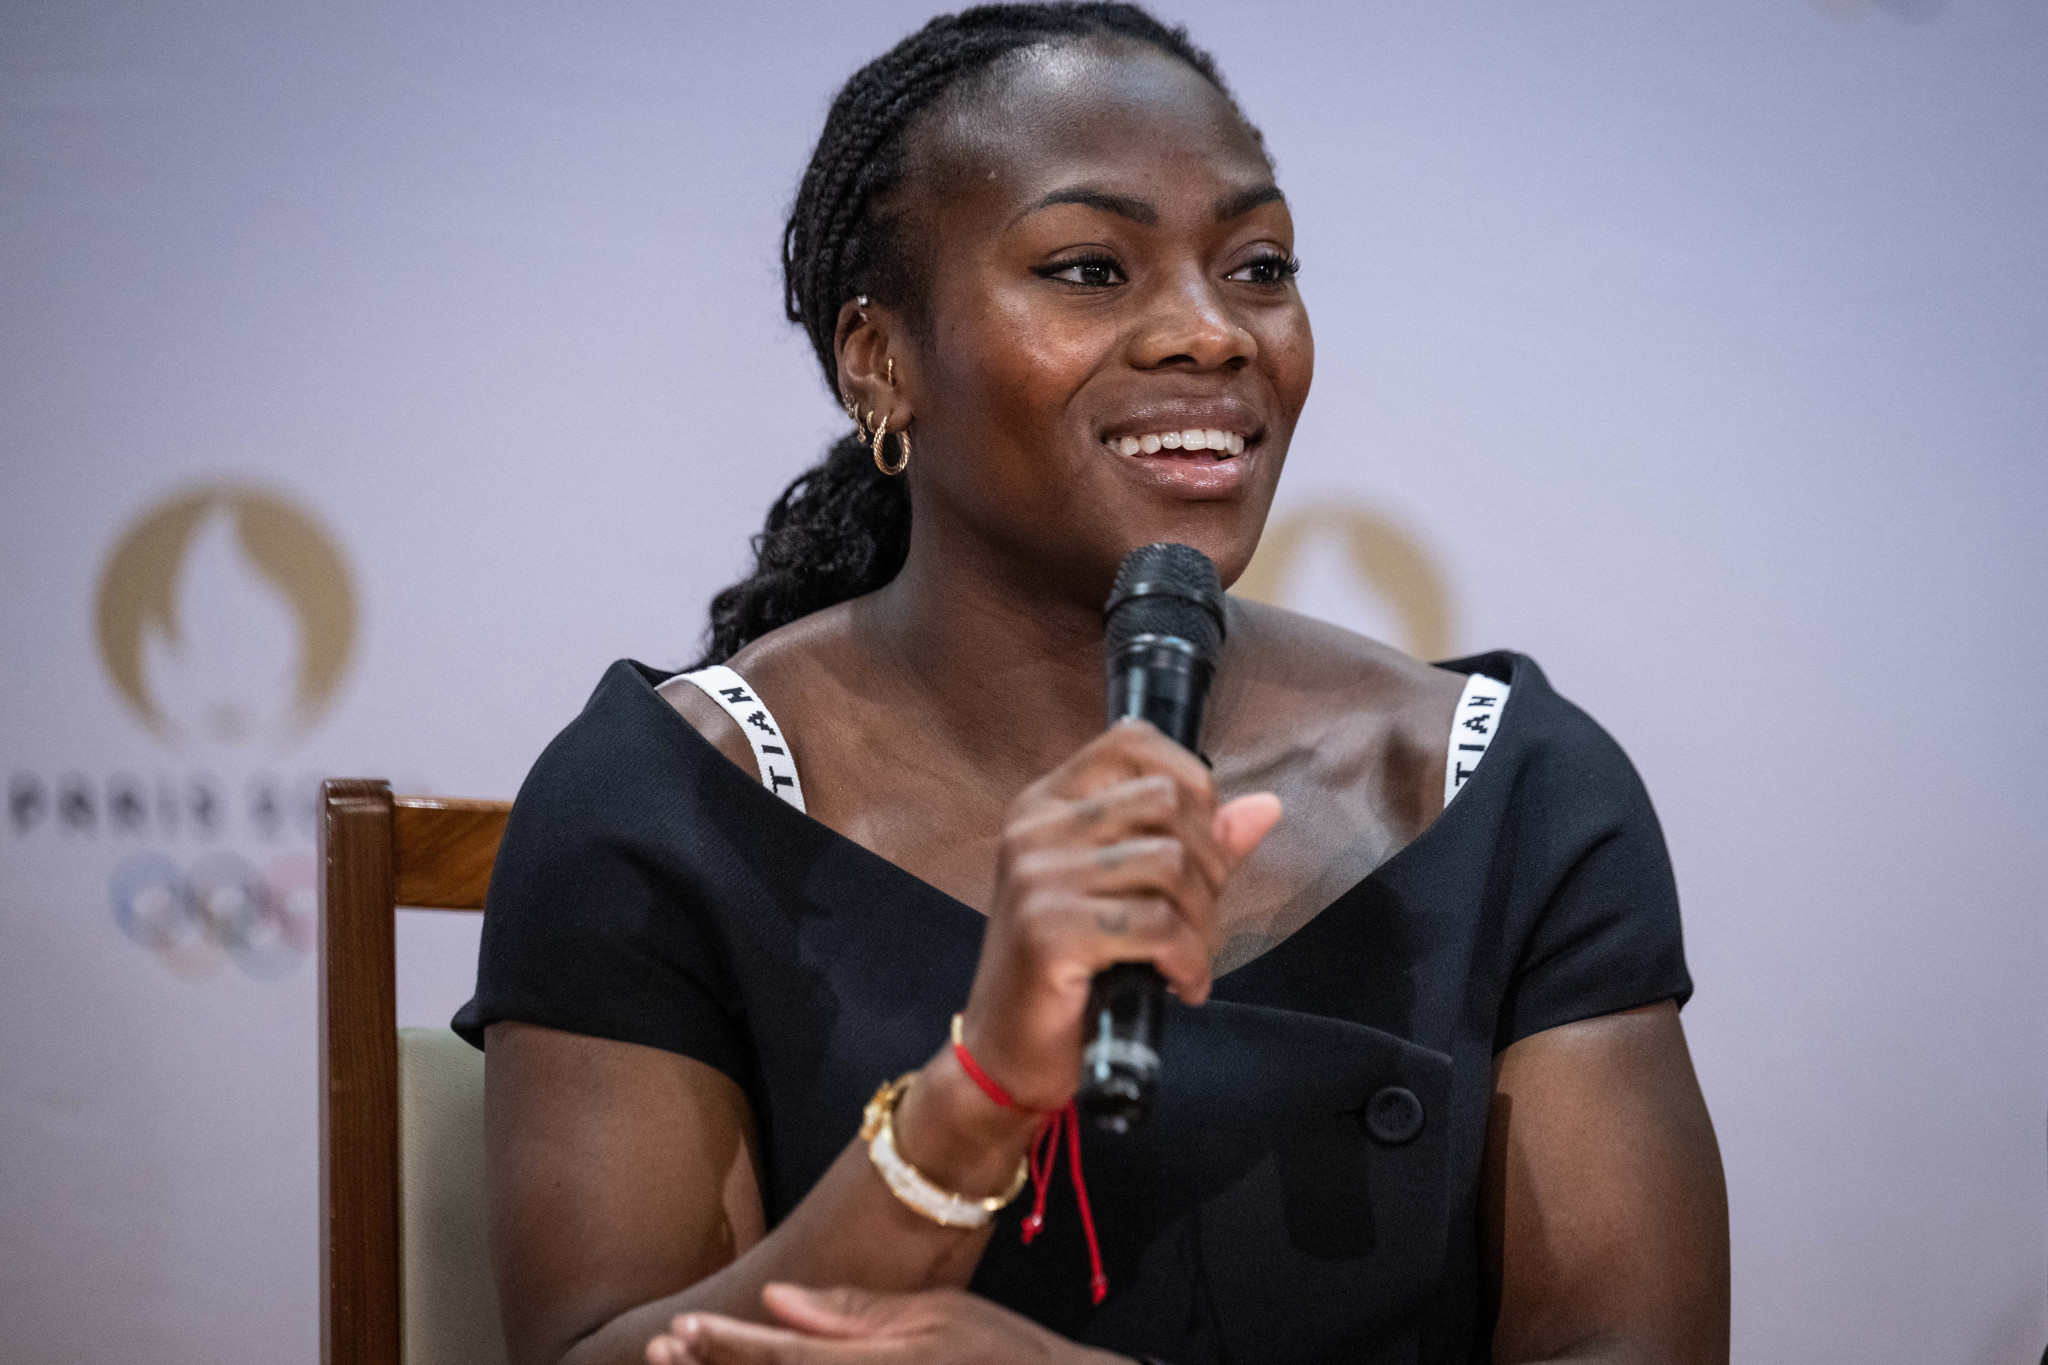 Agbegnenou happy with decision to provide hotel rooms for breastfeeding athletes